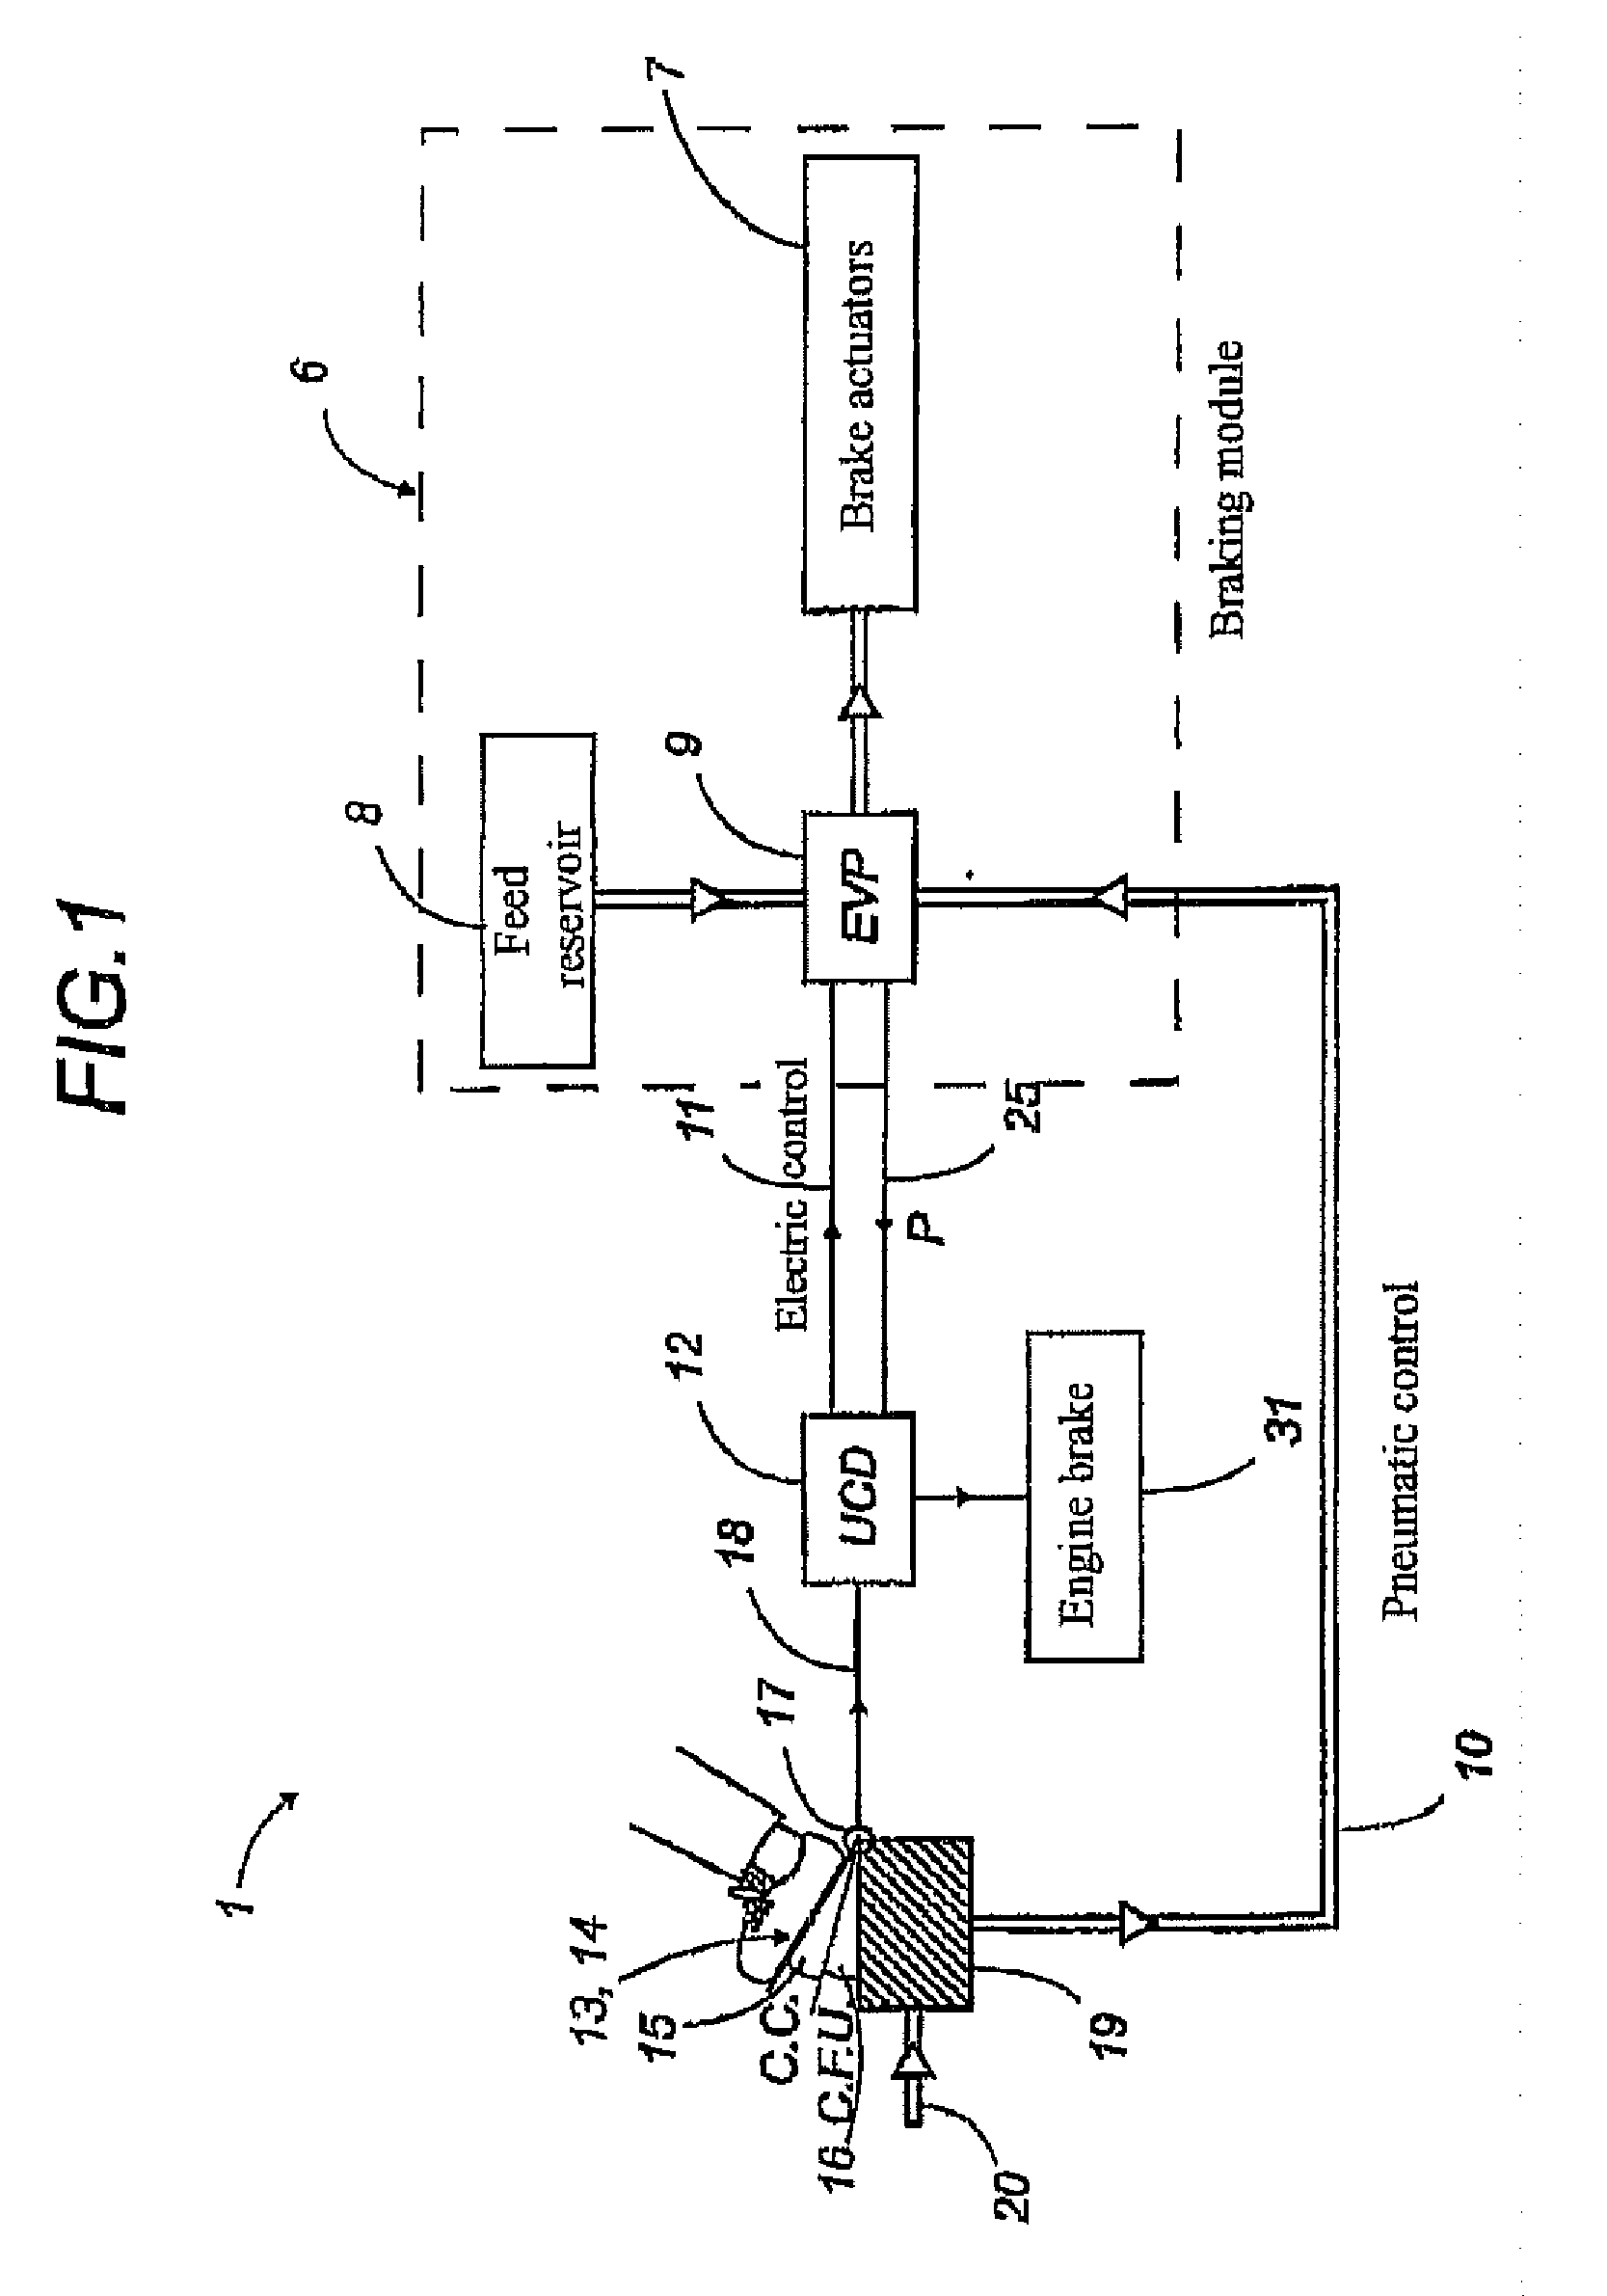 Two-Stage Electromechanically Controlled Braking System for a Multiaxle Road Vehicles